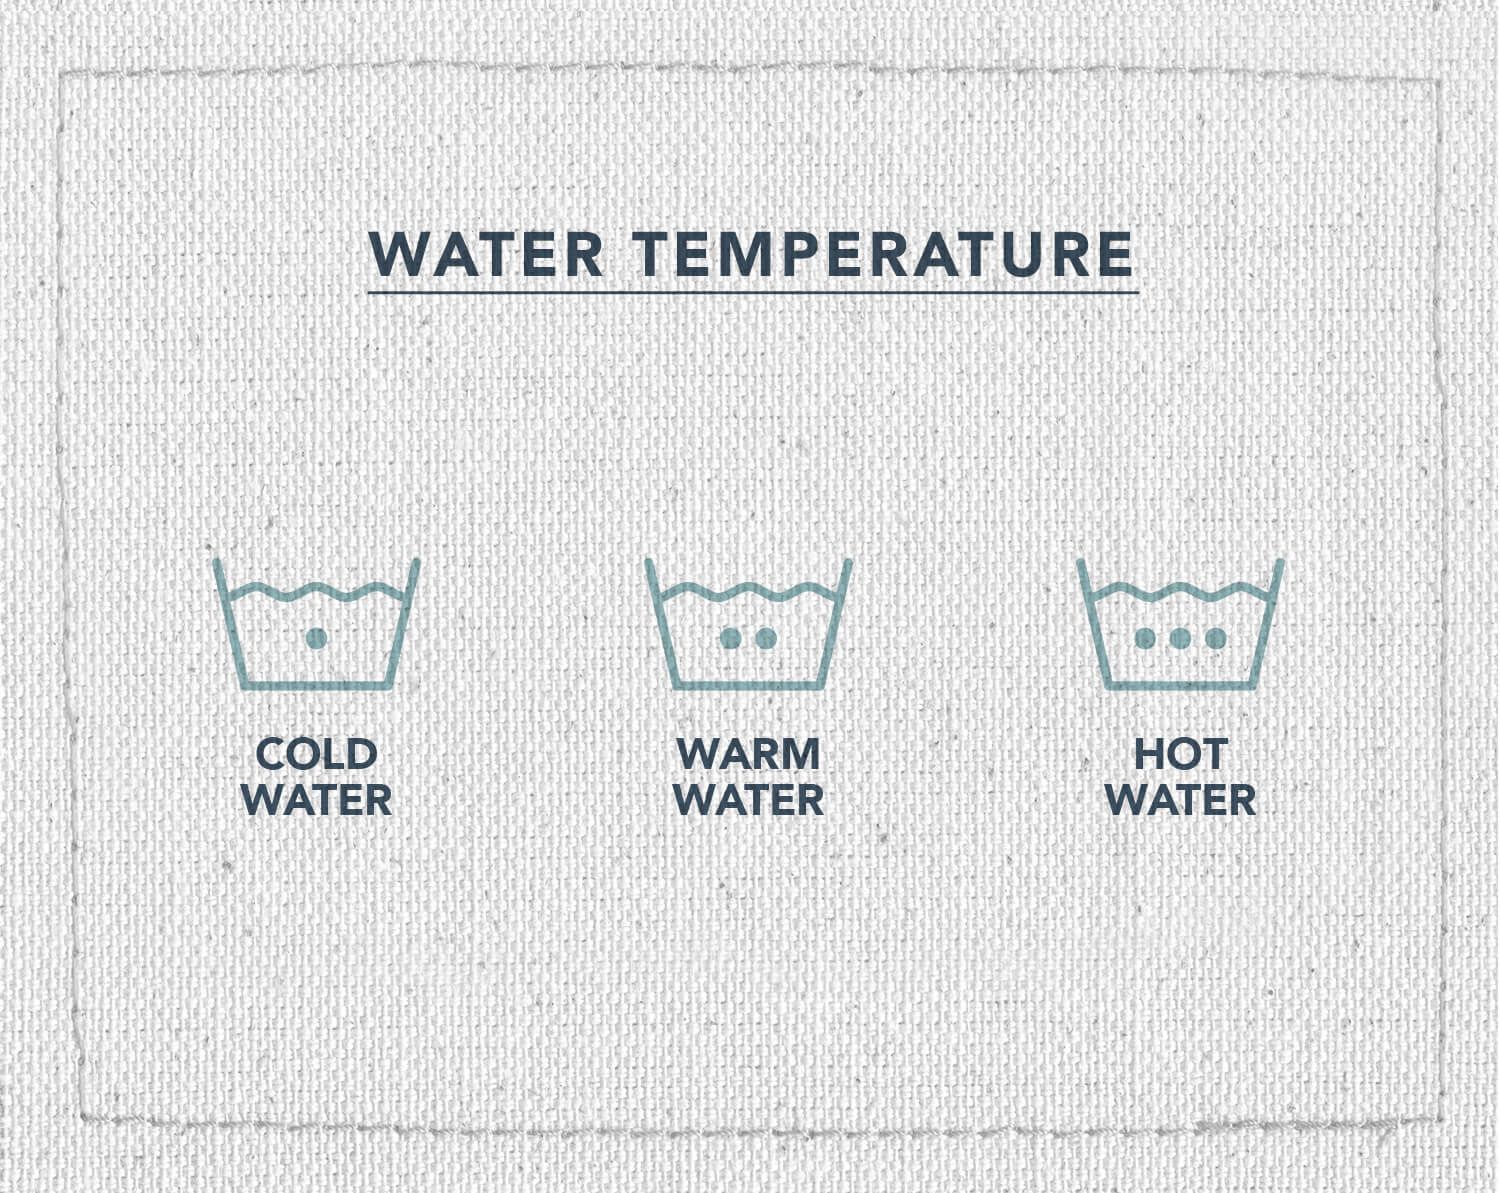 An infographic of three laundry care symbols, indicating what symbol means indicates what temperature you should wash your clothes at, cold water, warm water, and hot water